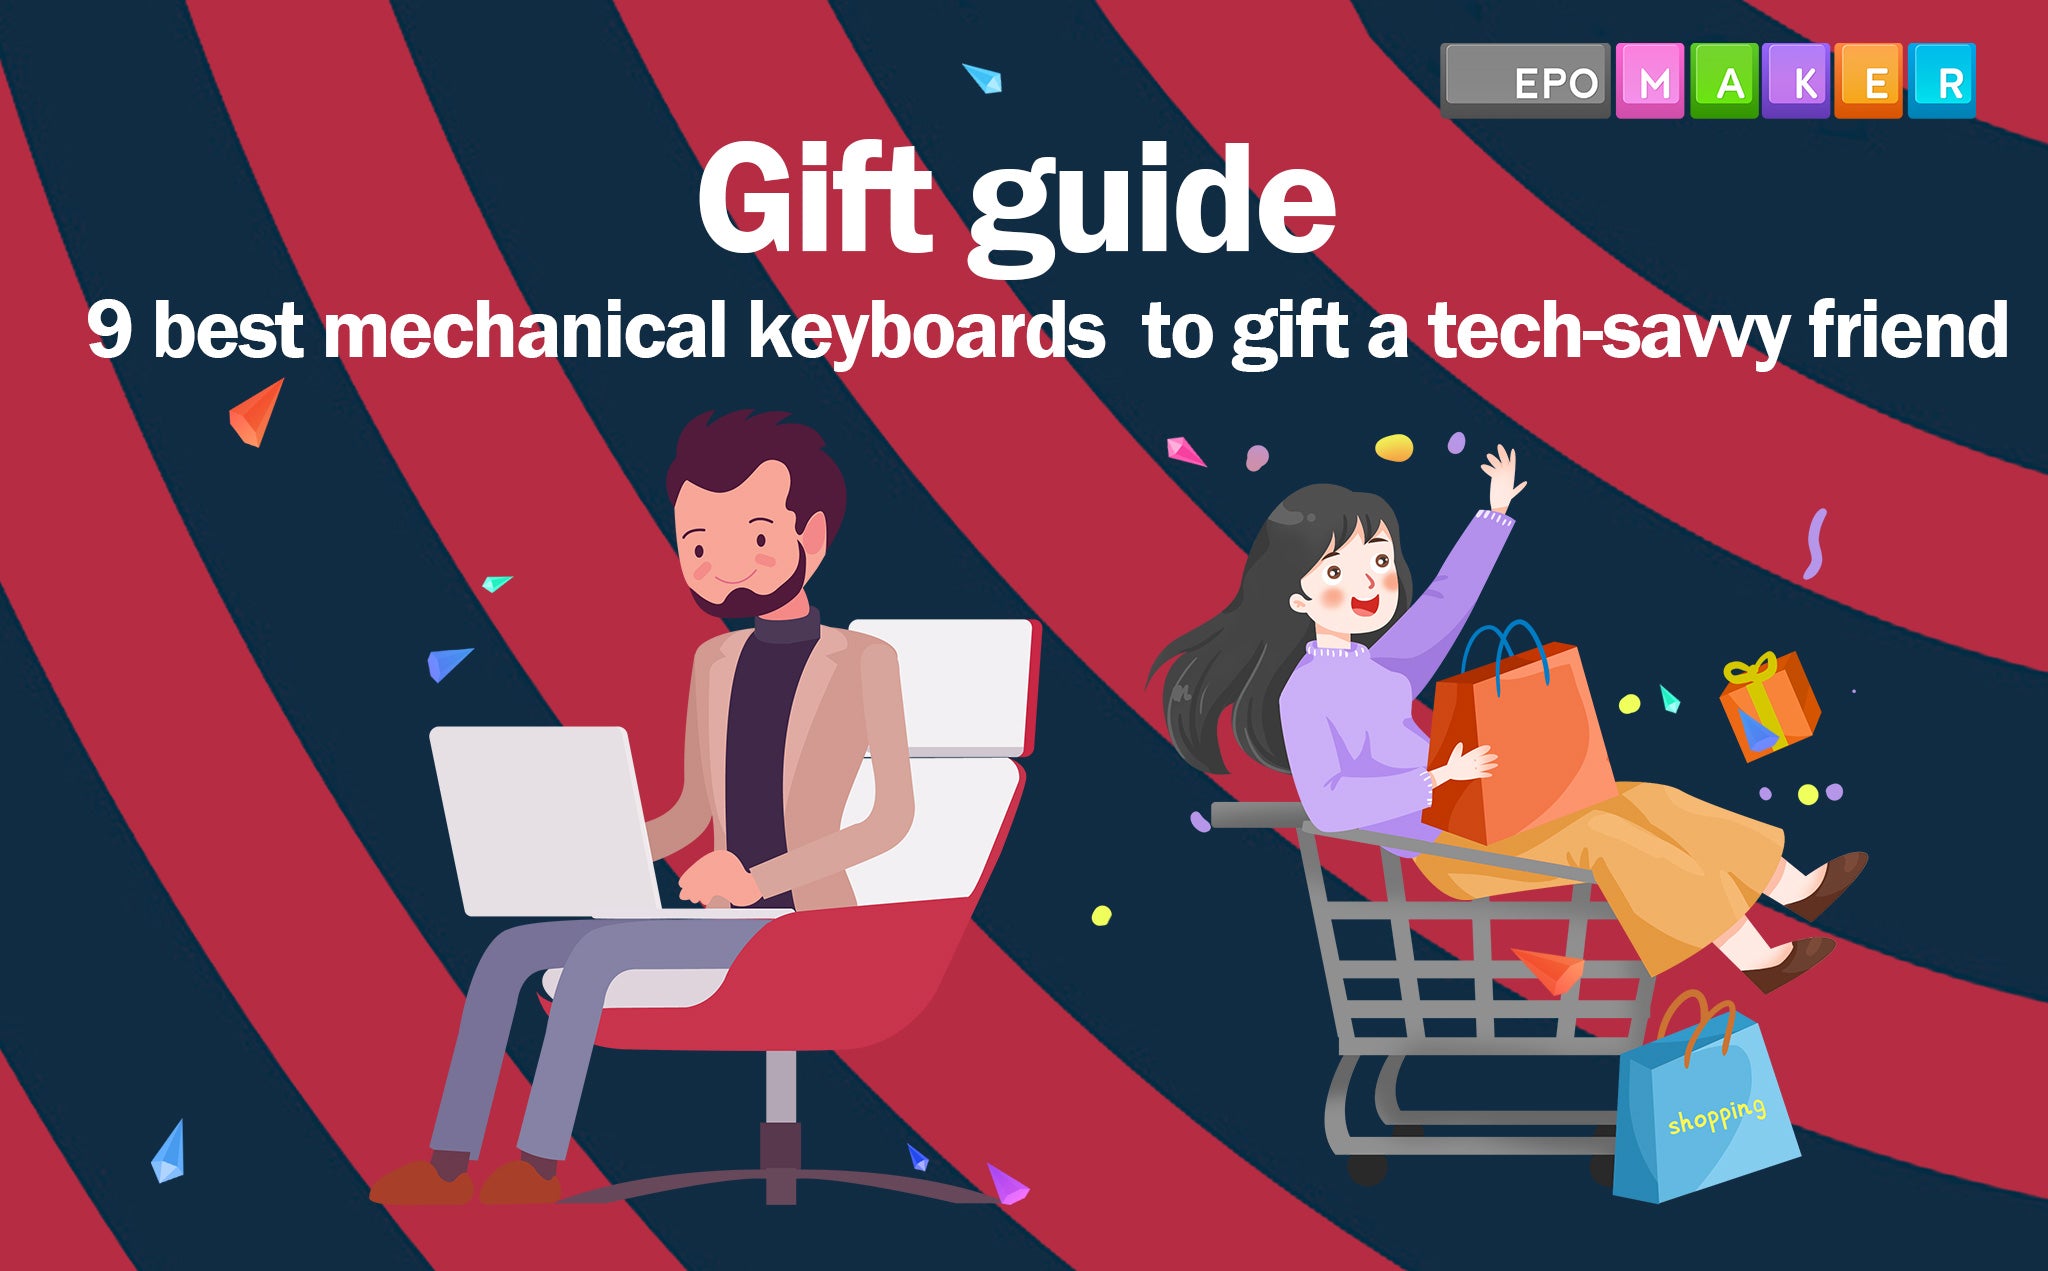 Epomaker 2020 Gift Guide: 9 Best Mechanical Keyboards to Gift A Tech-savvy Friend